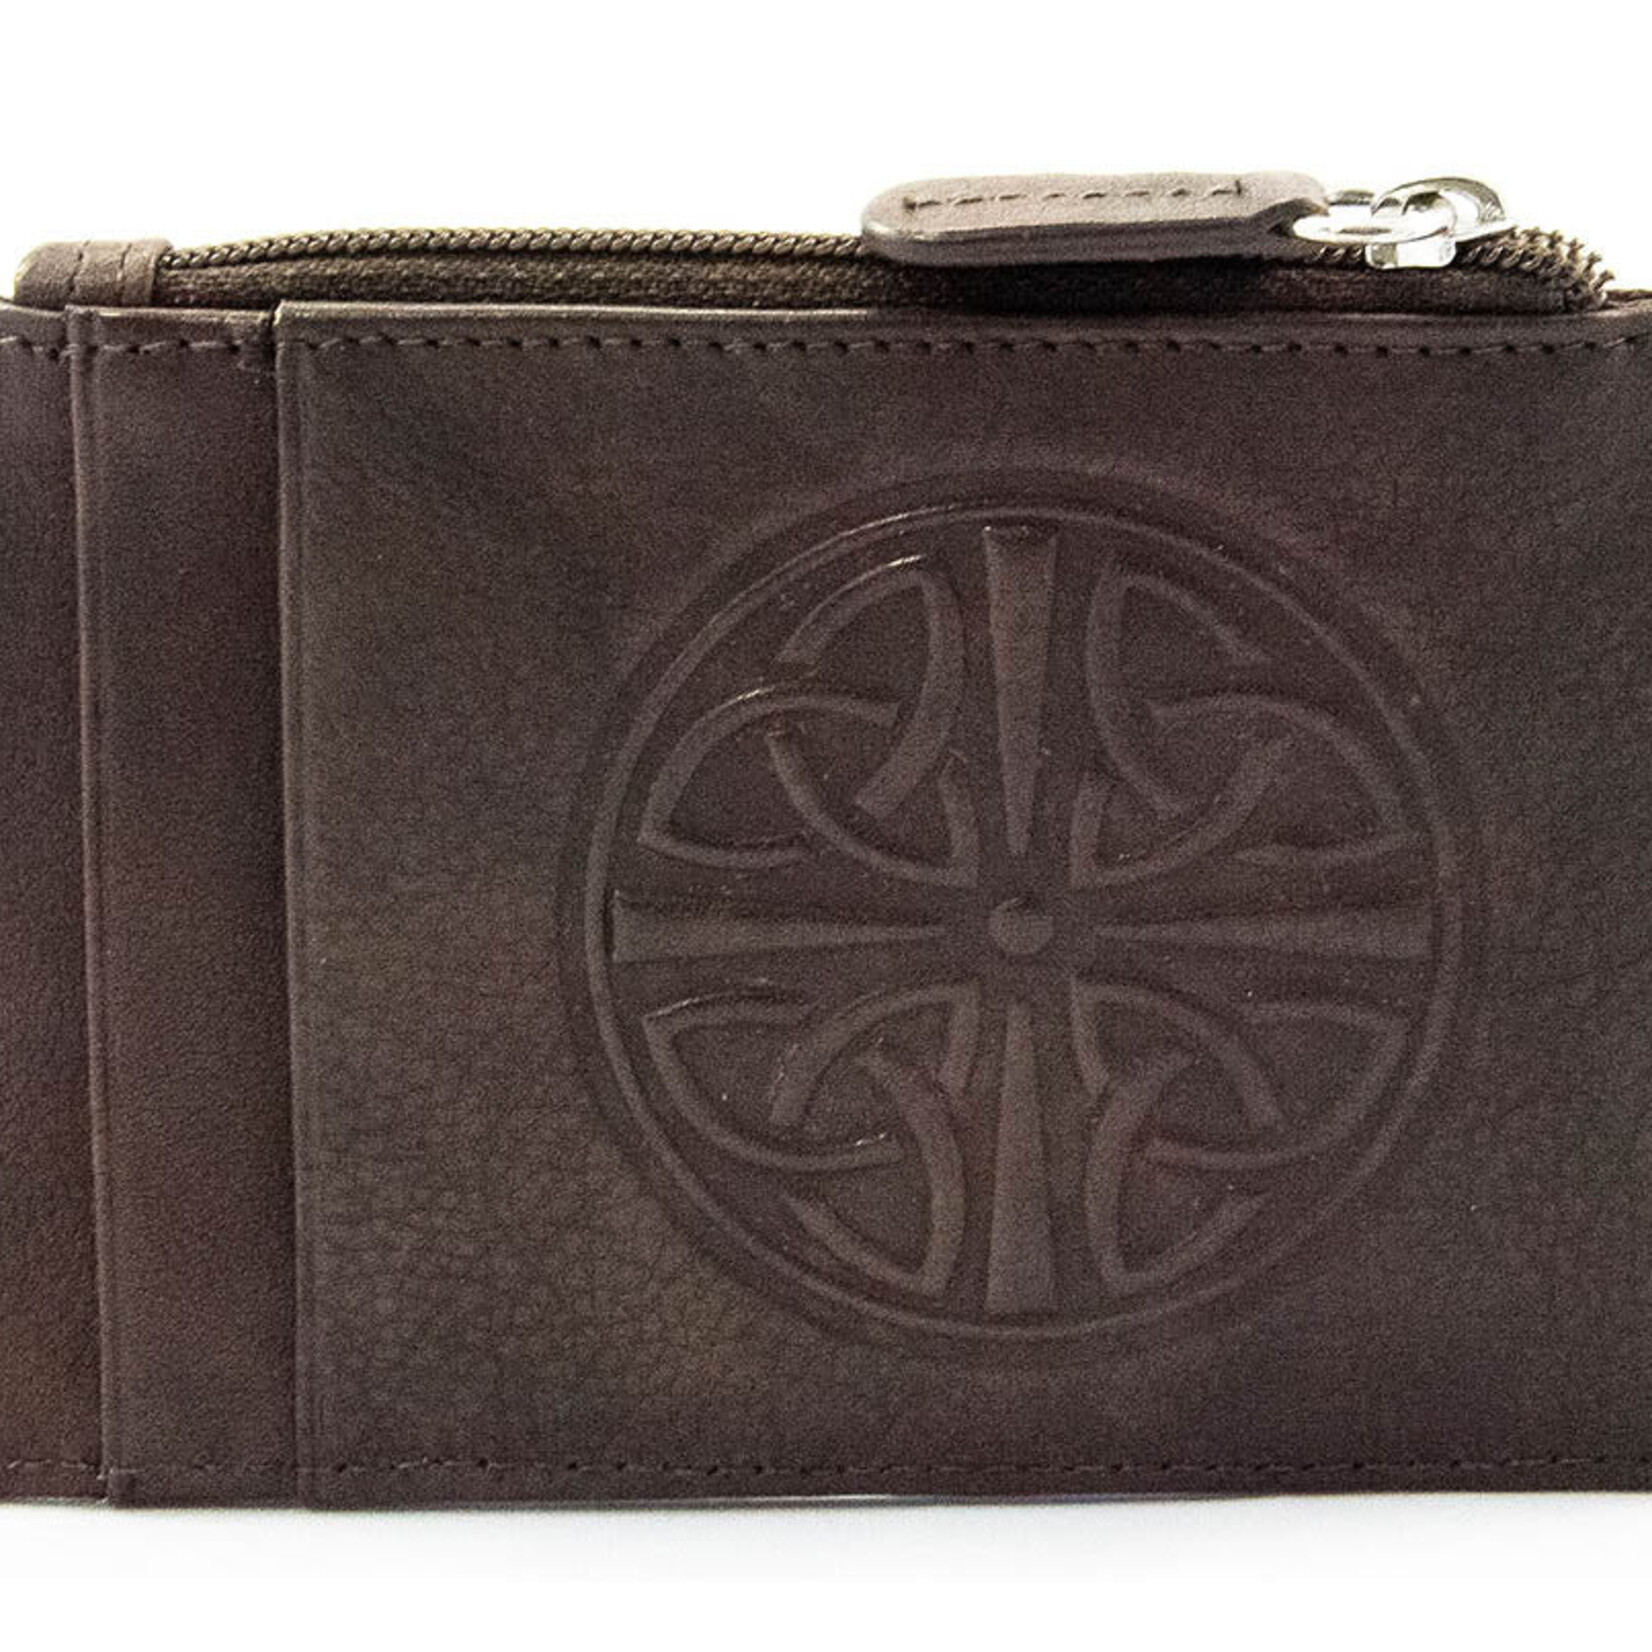 Because I Like It Trinity Knot Credit Card Holder